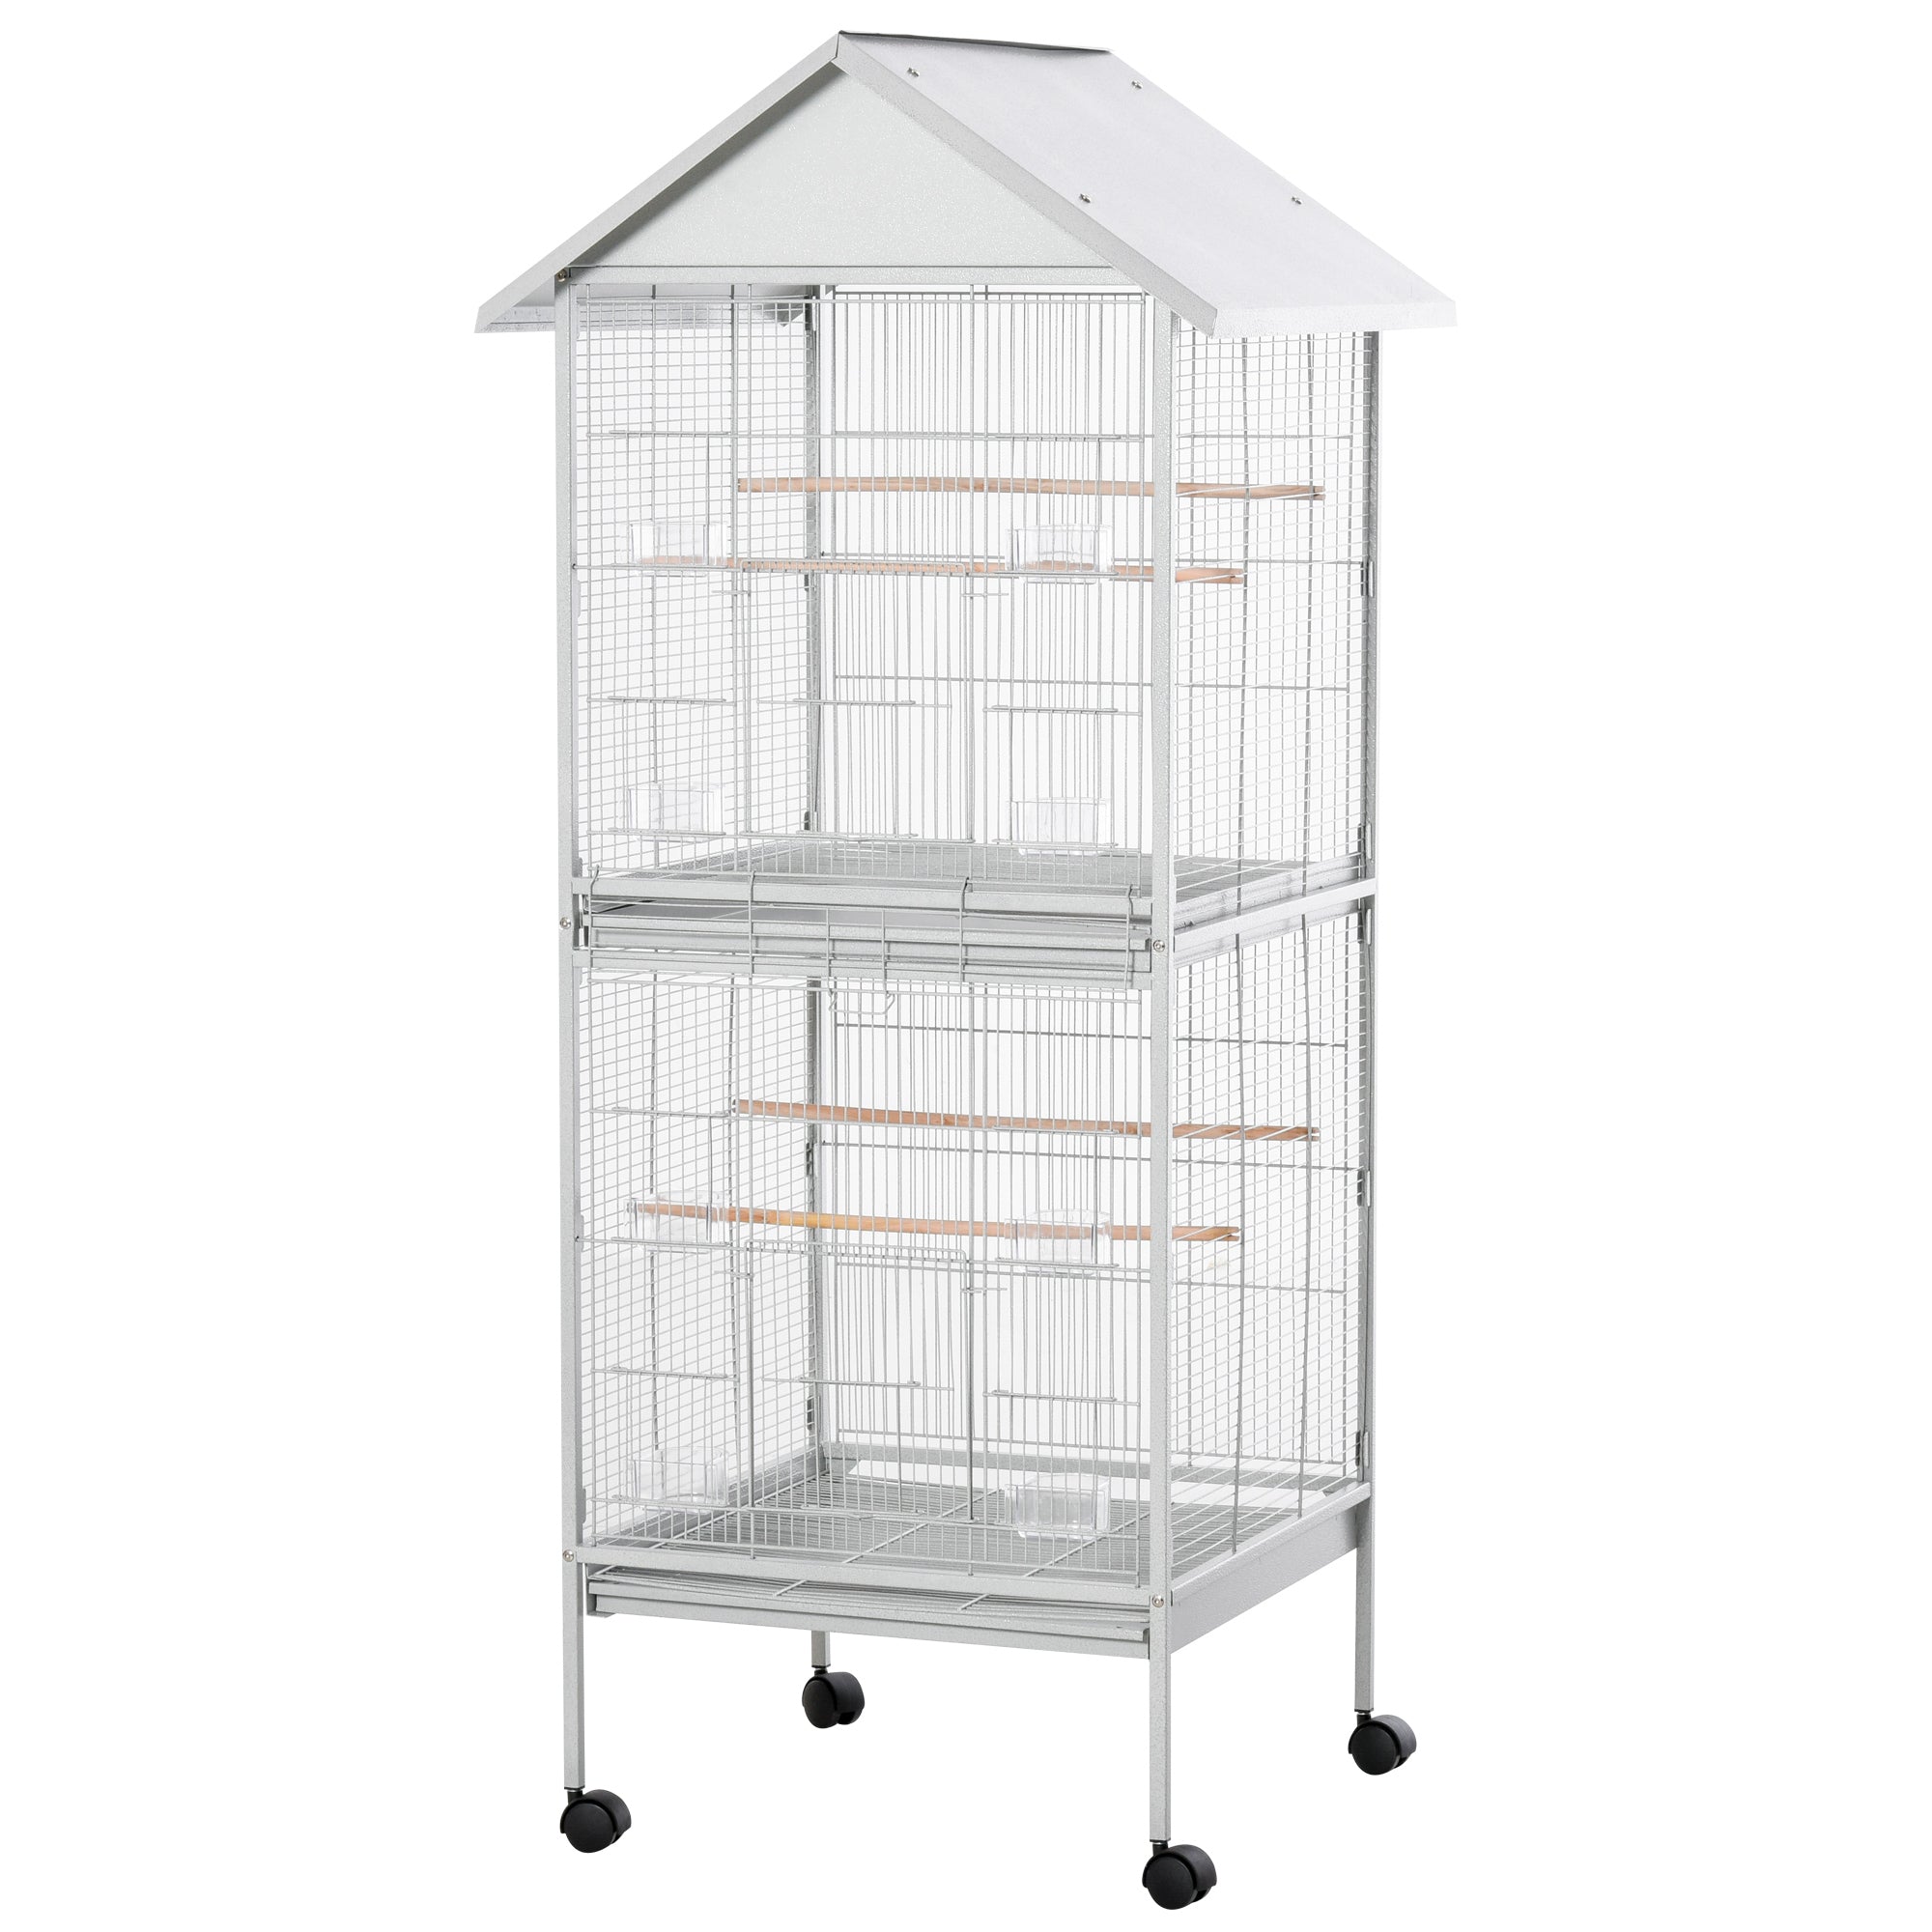 170cm Large Wrought Metal Bird Cage Mobile Feeder with Rolling Stand Perches Food Containers Doors Wheels White